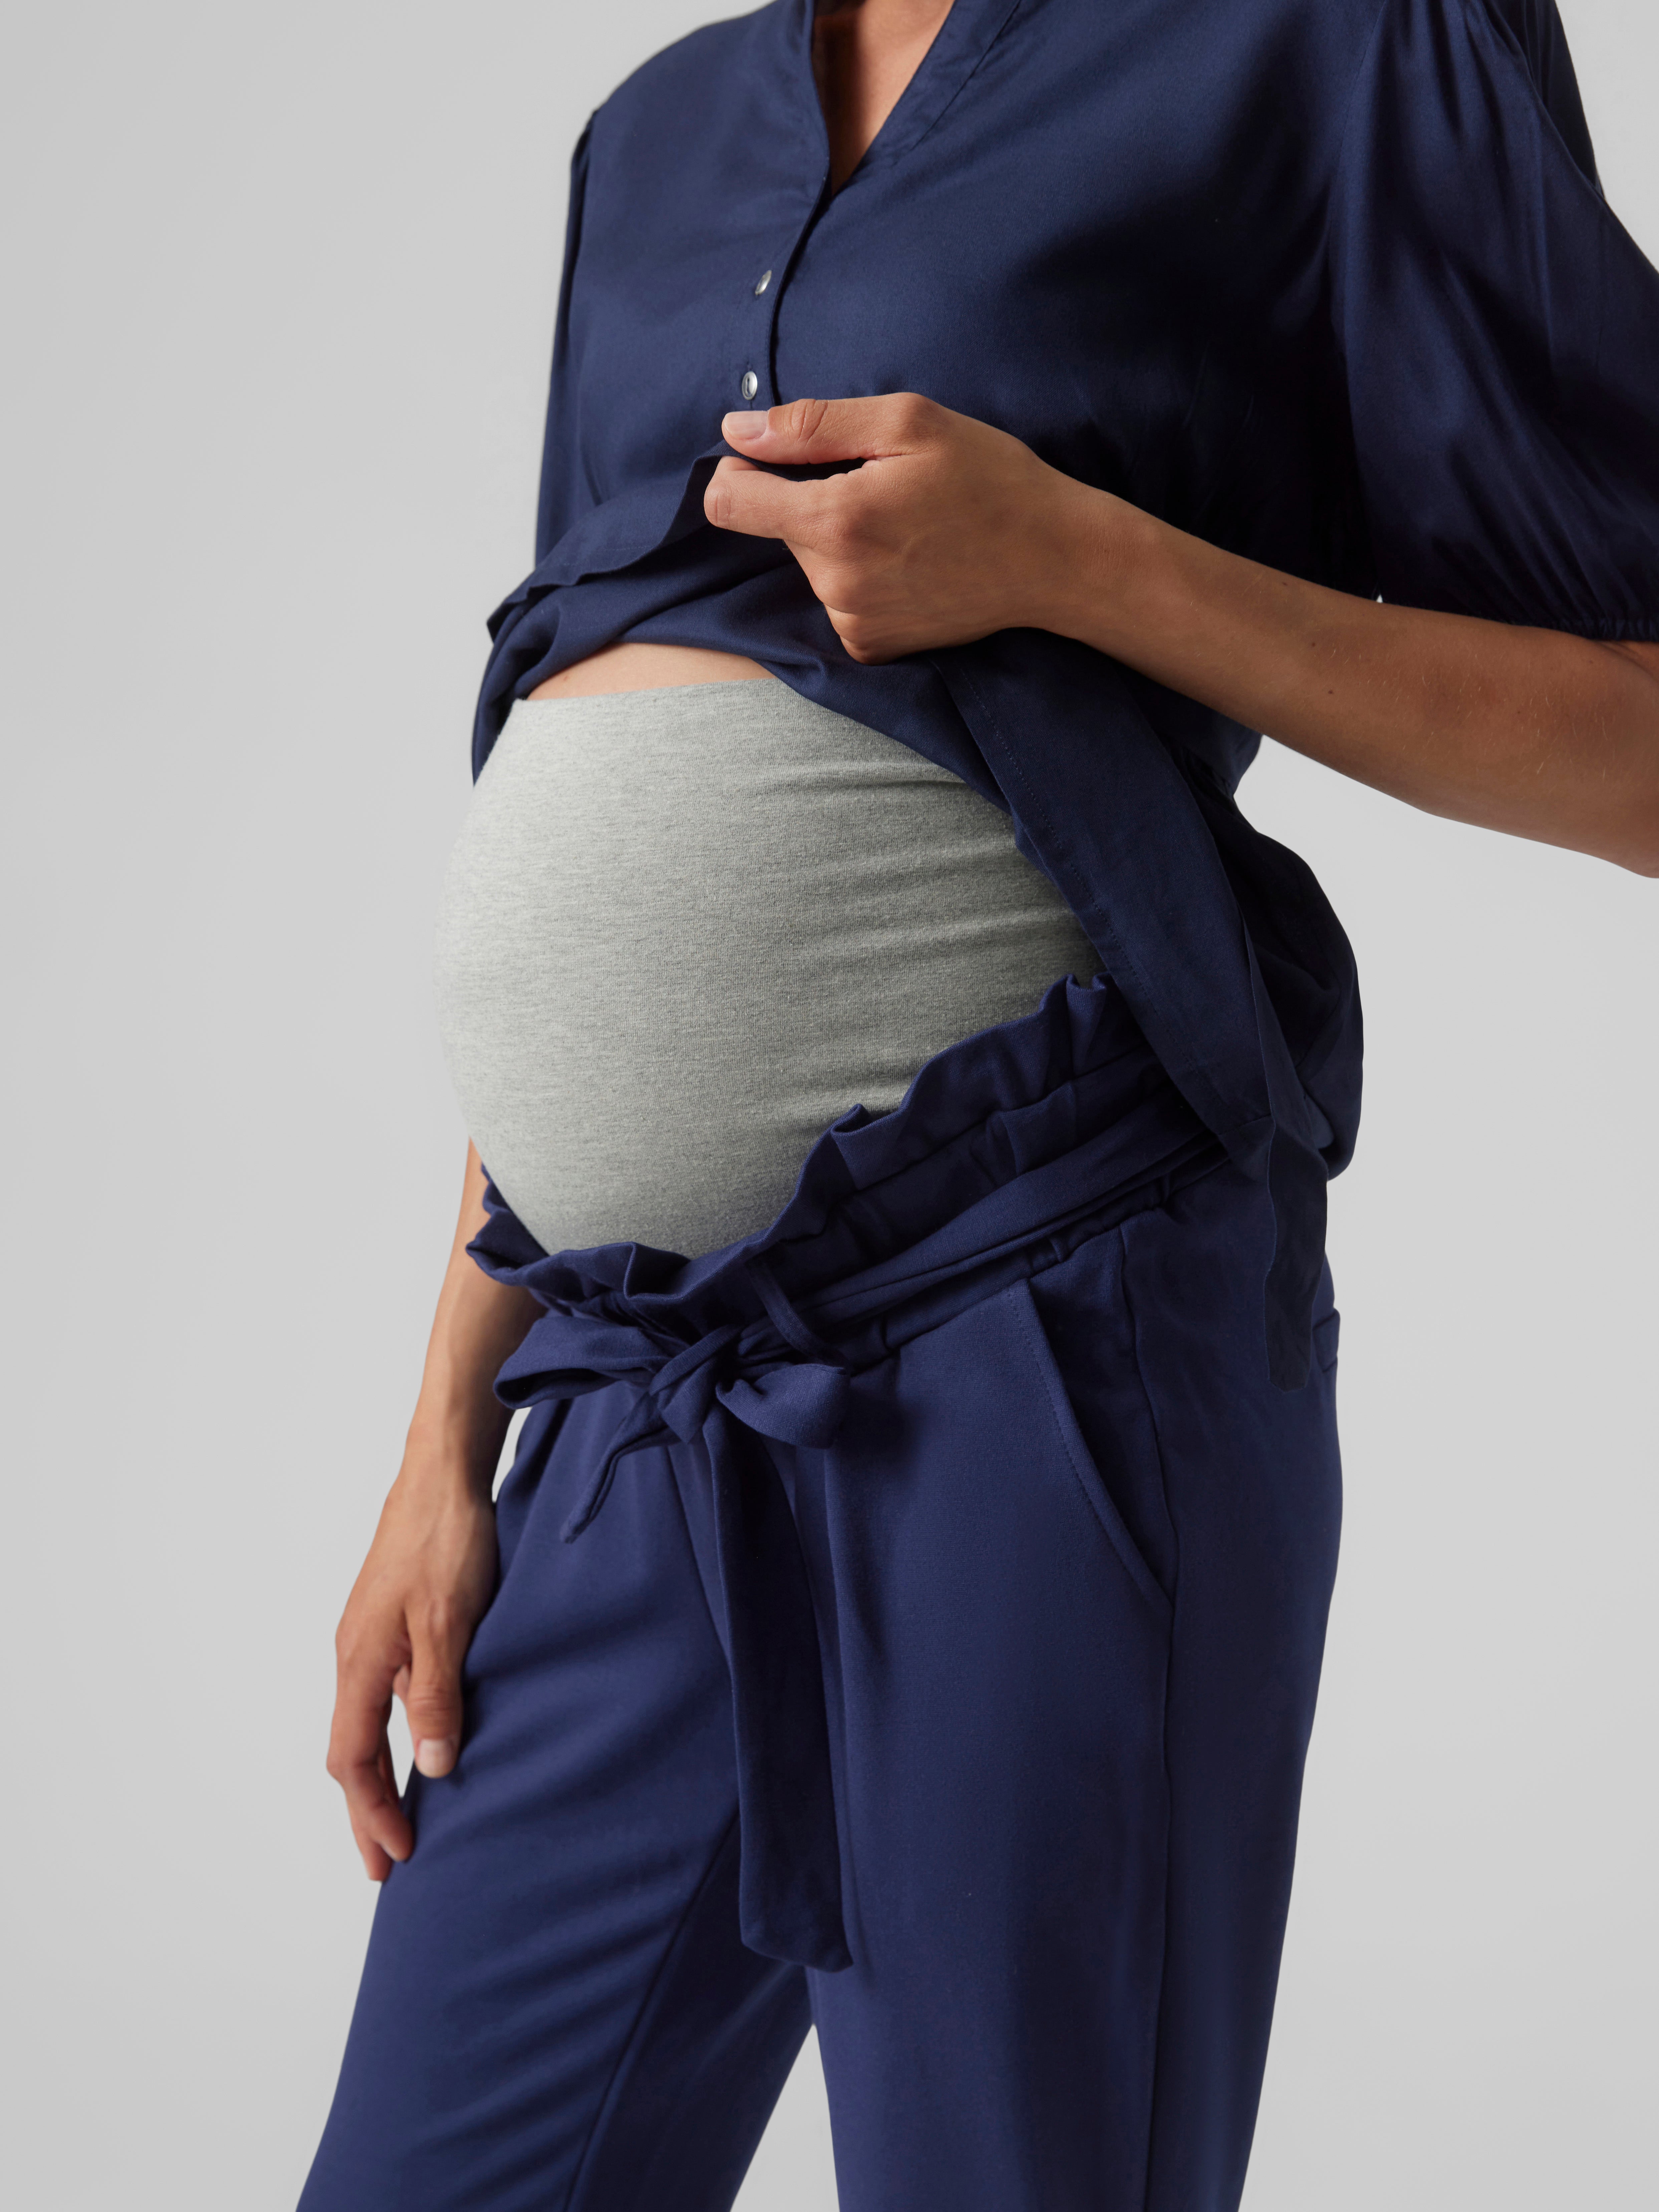 Wide Leg Loose Straight Denim Maternity Jeans Belly Pants Pregnant Trousers   eBay